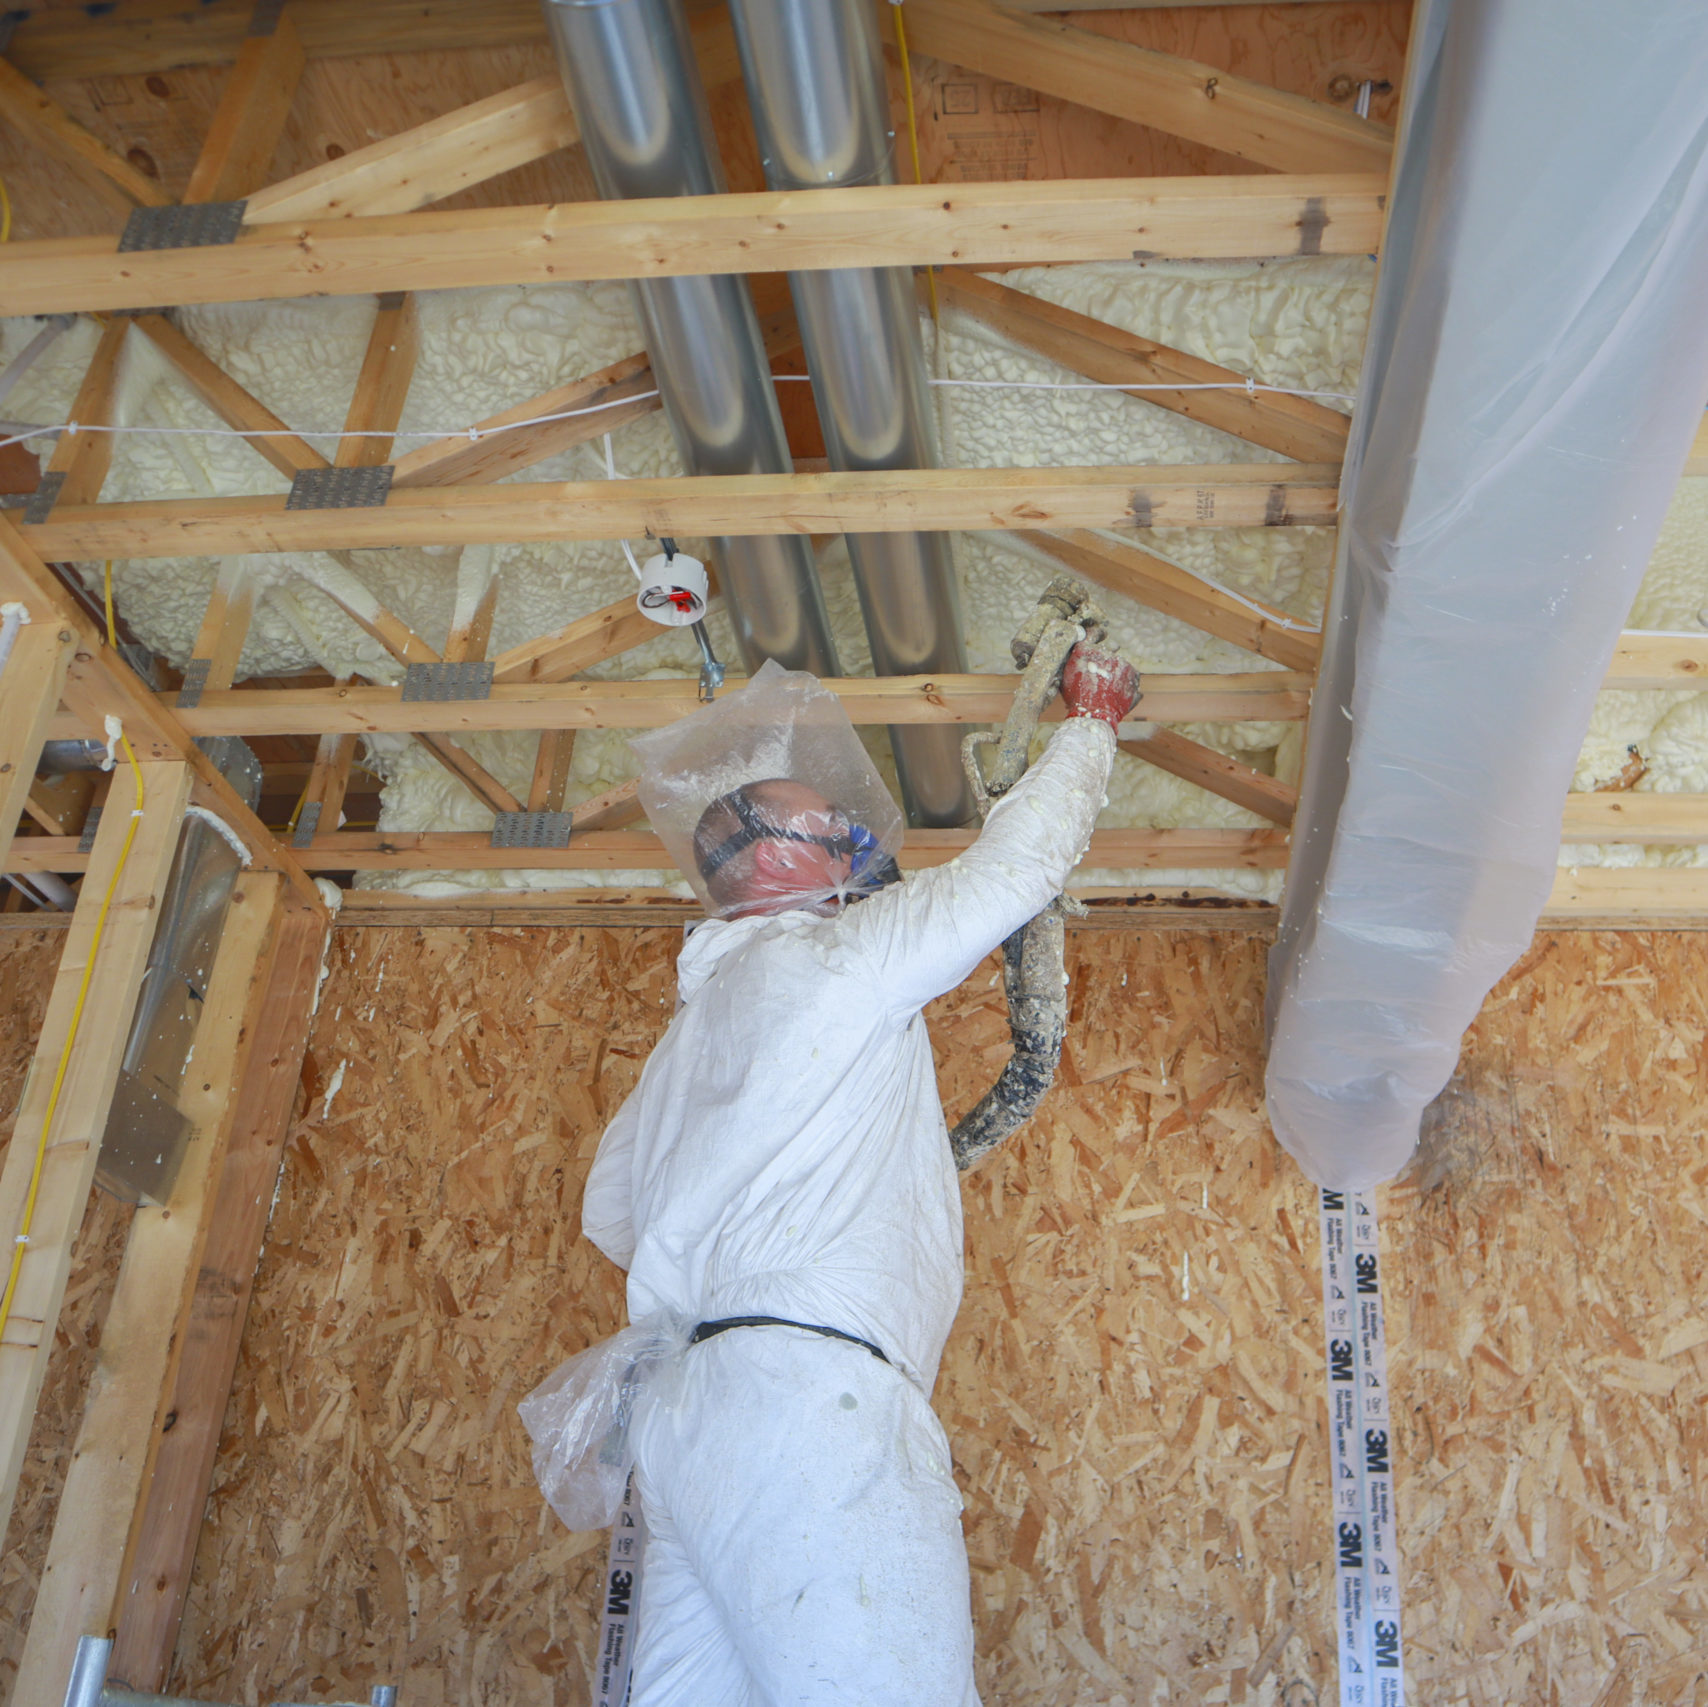 Man in protective suit spraying a ceiling with insulating foam